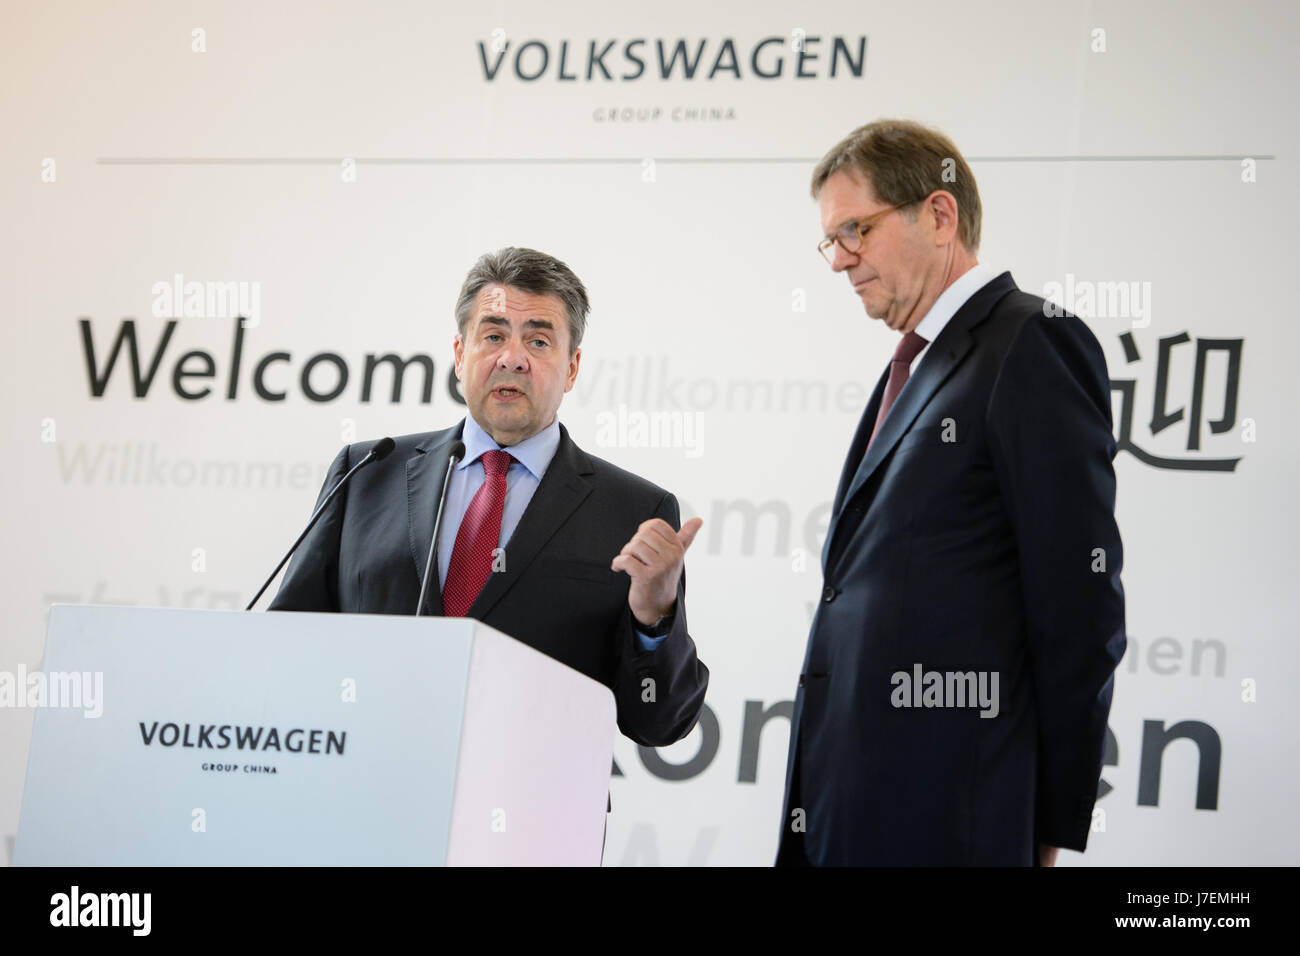 China. 24th May, 2017.German Foreign Minister Sigmar Gabriel (L) speaks on a podium along with the Chairman of the Volkswagen Group China, Jochem Heizmann, during a visit to the VW/Audi Research and Development Centre in Beijing, China, 24 May 2017. Minister Gabriel visited for one day the capital of the People's Republic of China. Photo: Gregor Fischer/dpa/Alamy Live News Stock Photo